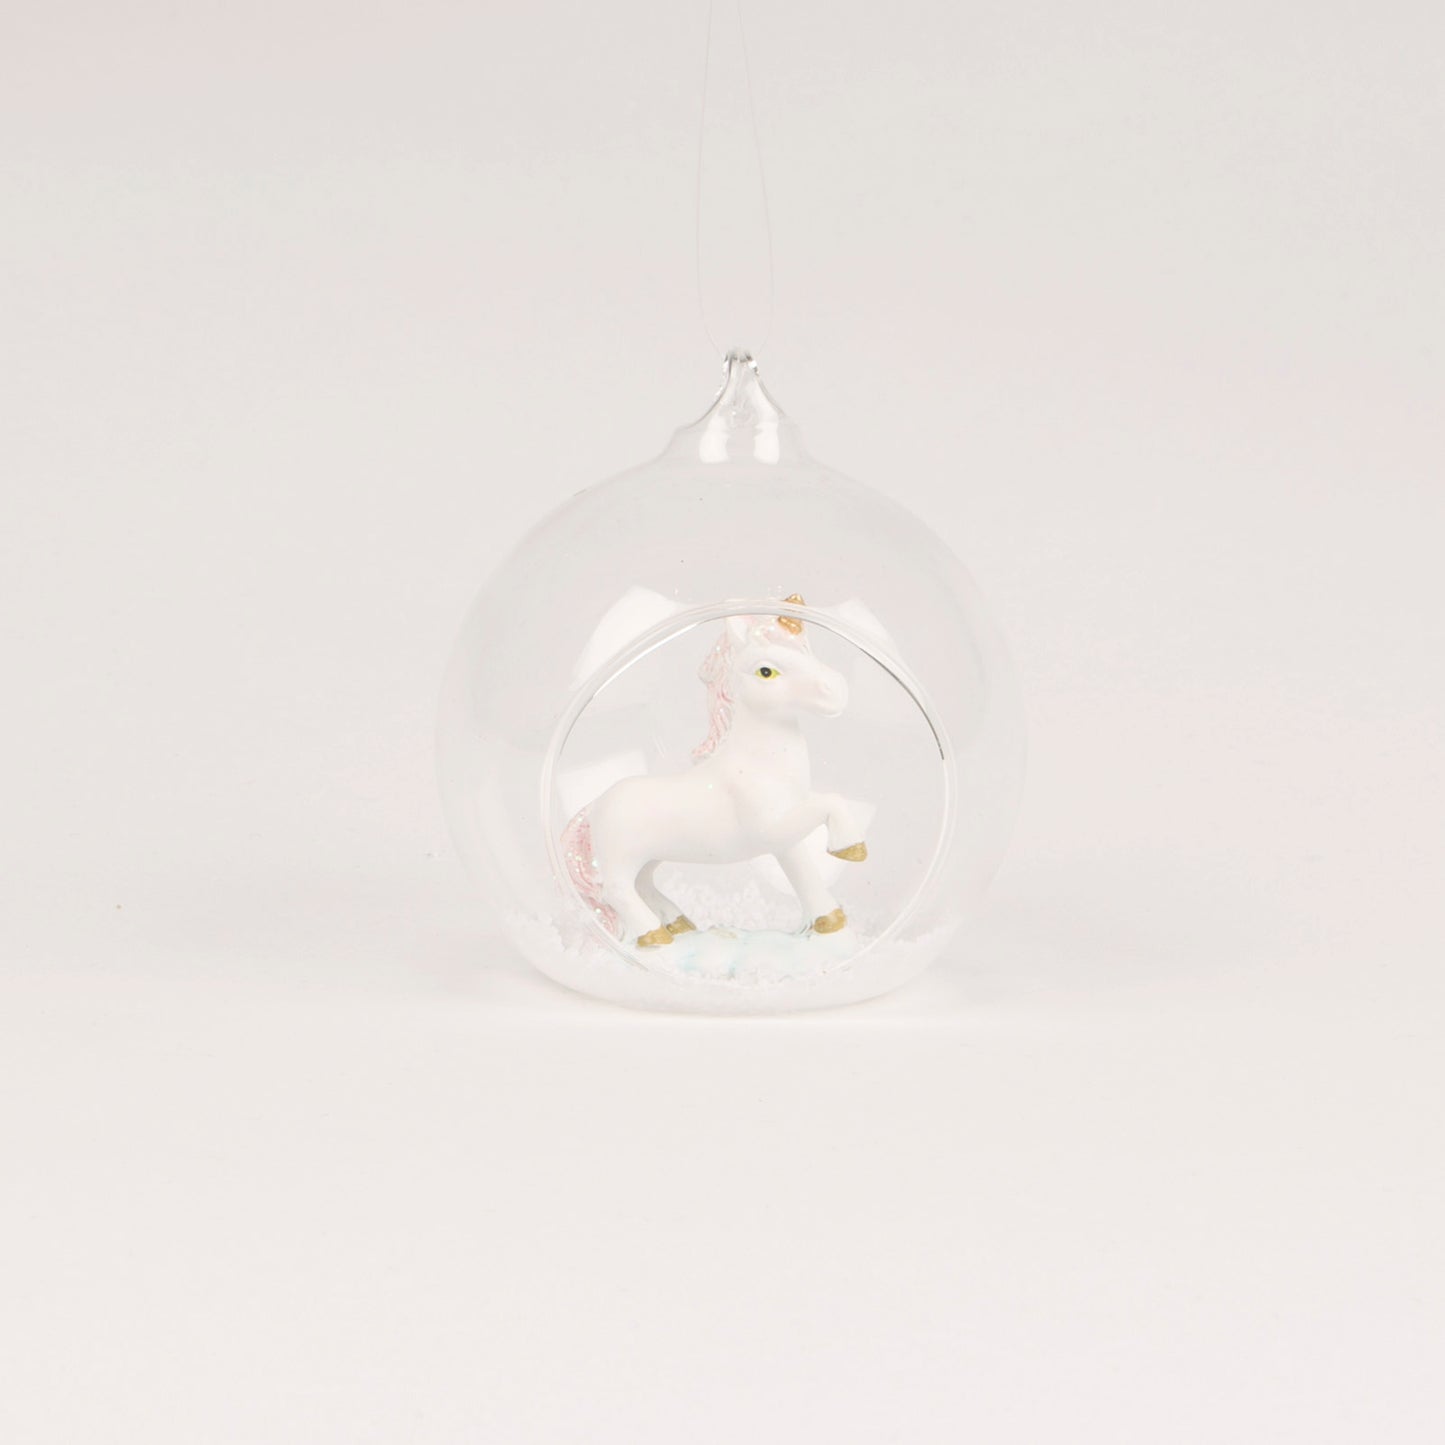 A beautiful open glass bauble Christmas tree decoration, with a glittery unicorn inside.